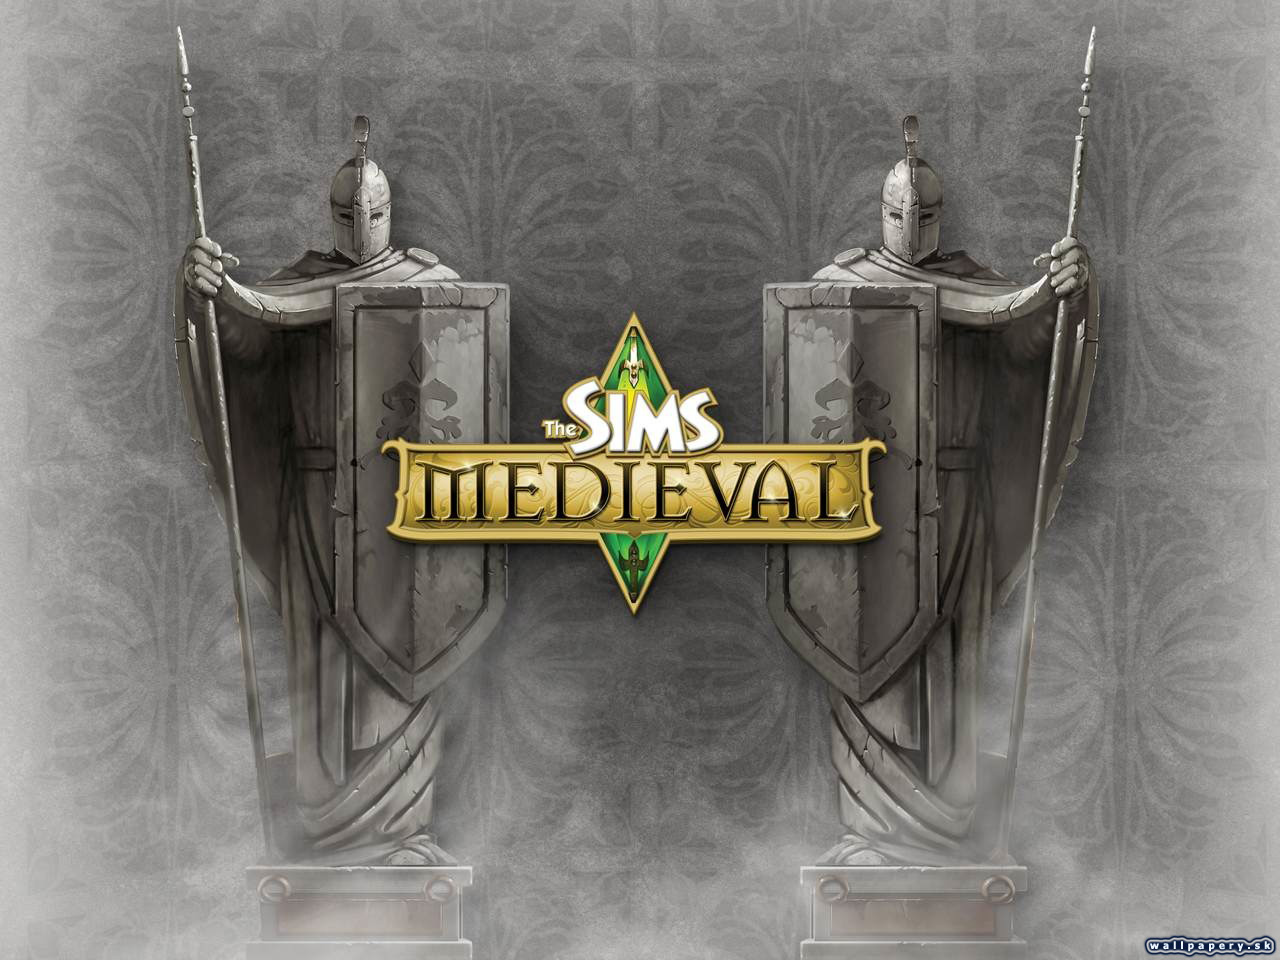 The Sims Medieval - wallpaper 5